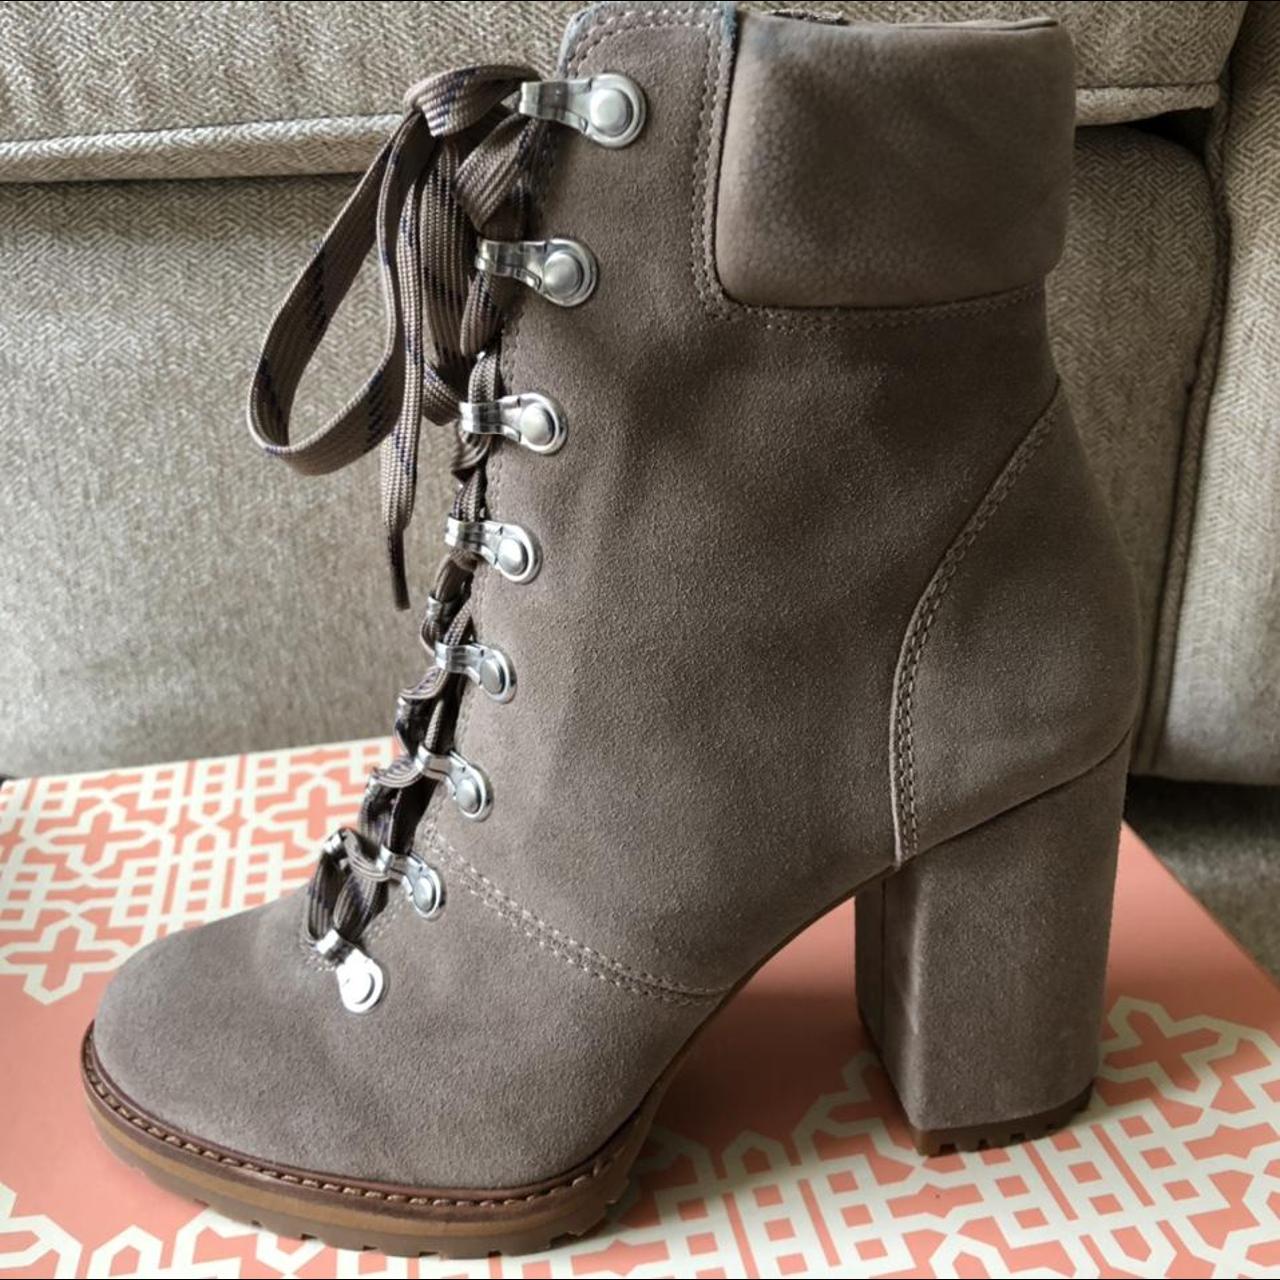 GIANNI BINI Mapped Out SUEDE ANKLE BOOTIES Hippie... - Depop